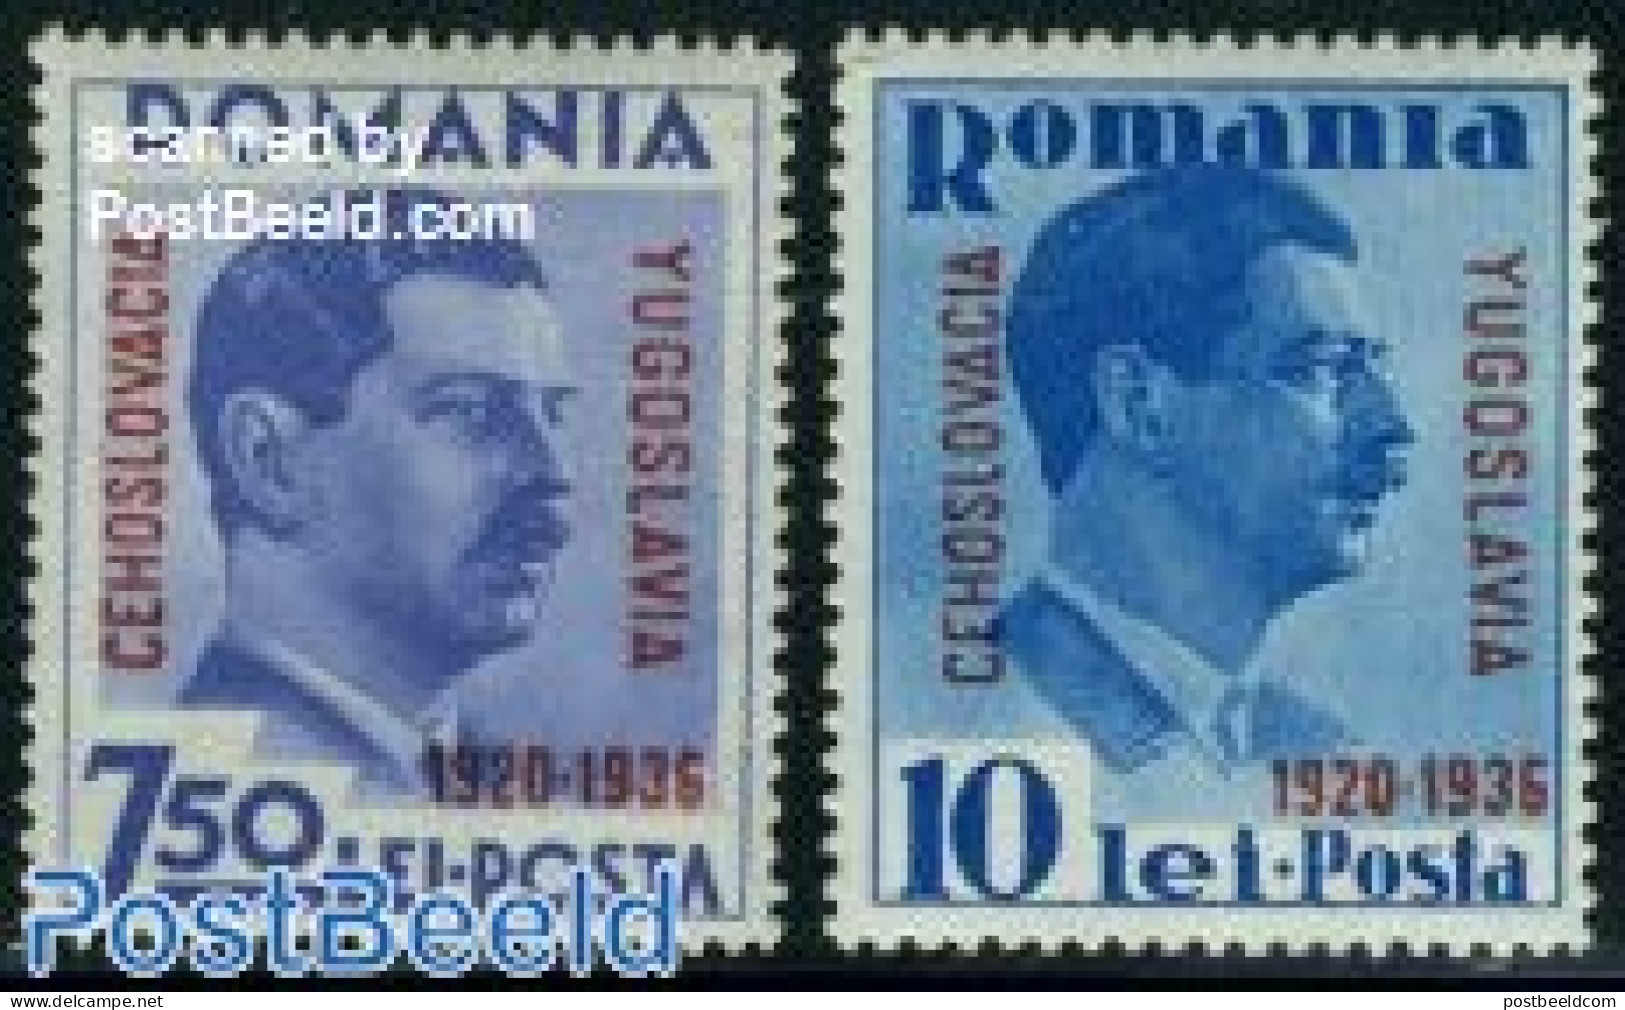 Romania 1936 Small Entente 2v, Unused (hinged), History - Europa Hang-on Issues - Ungebraucht